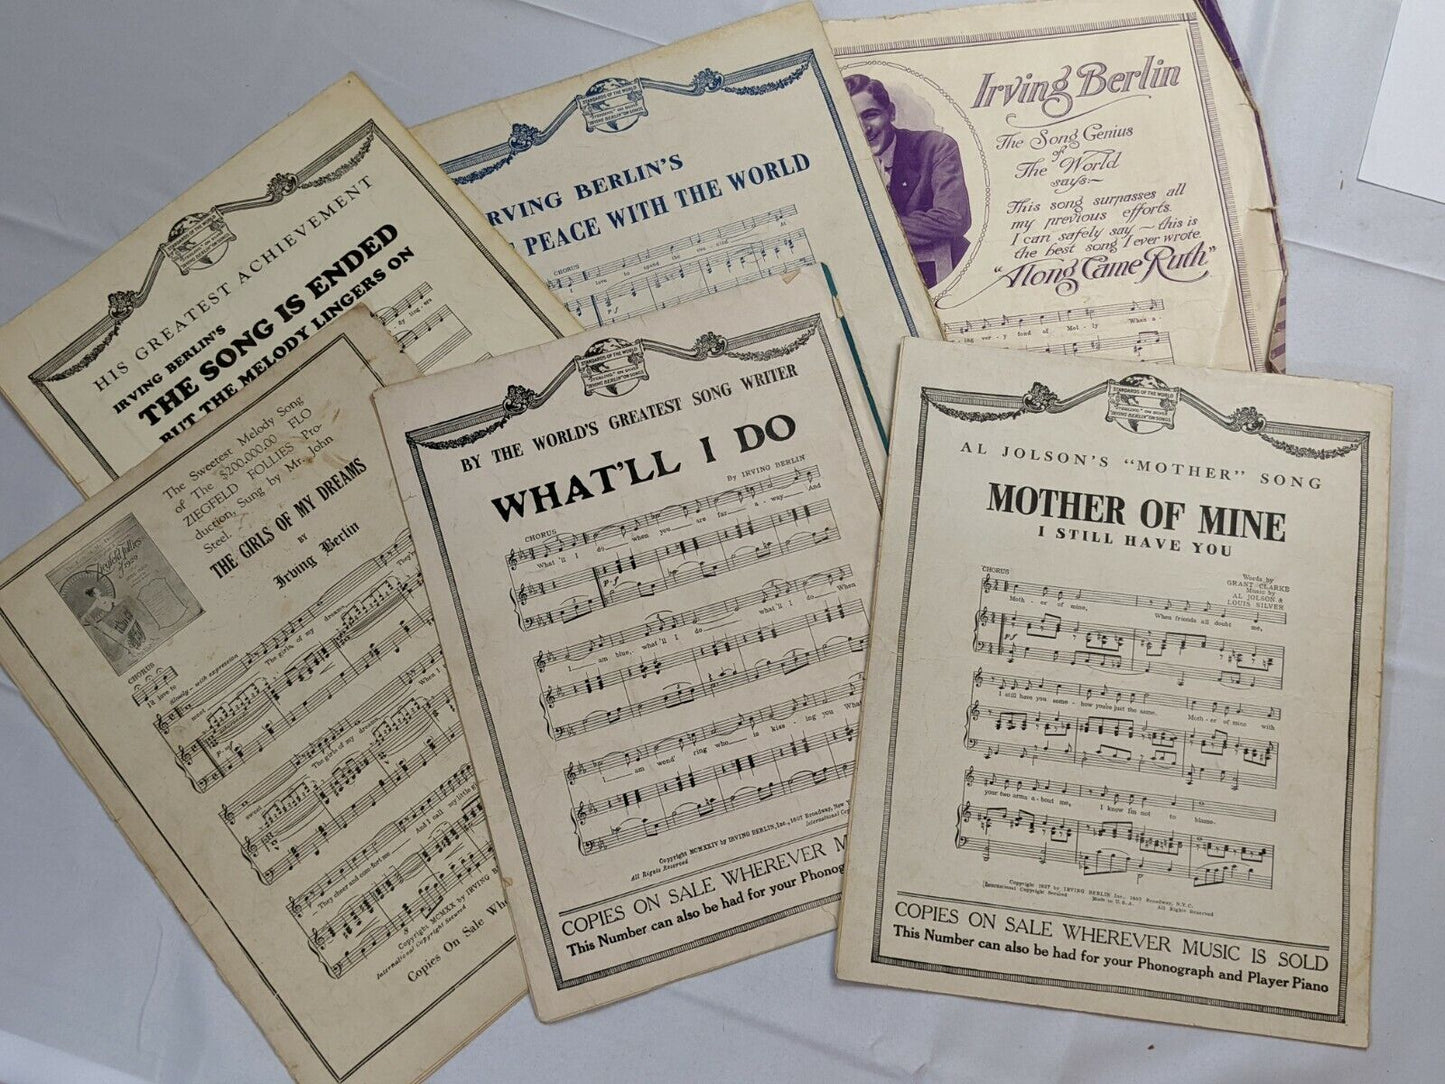 Lot of 6 Vintage Music Sheet Collection by Irving Berlin